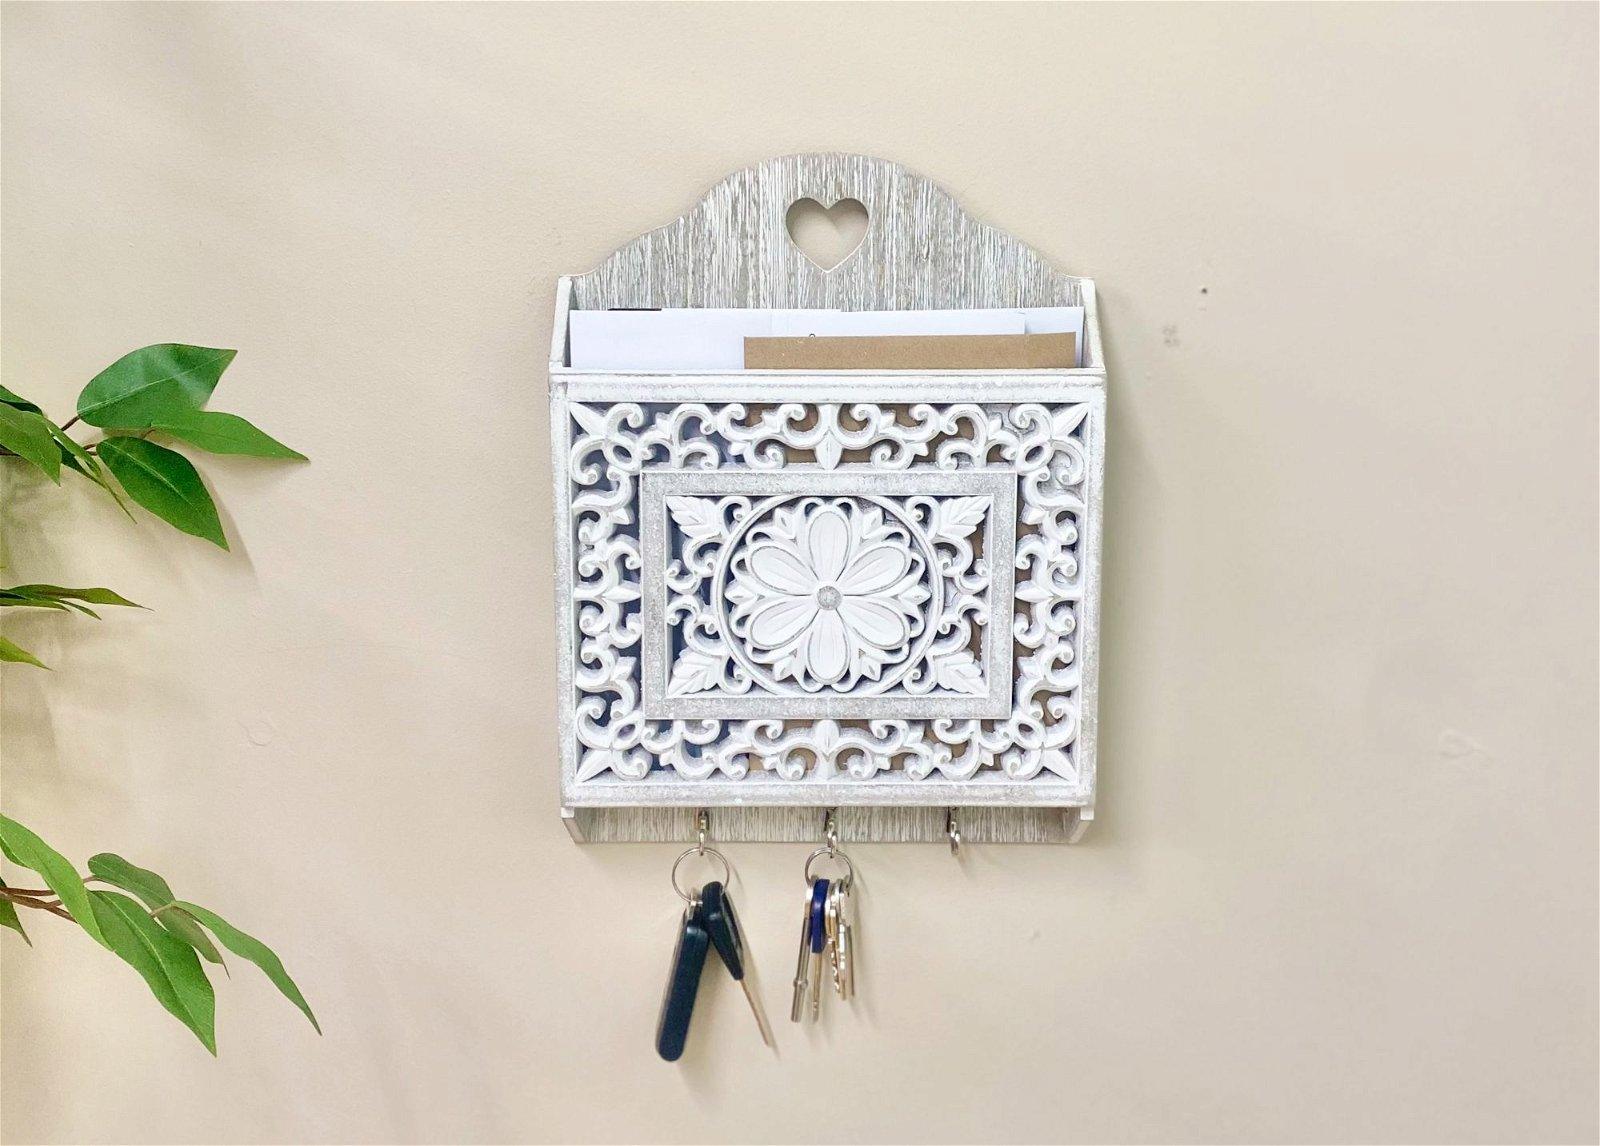 View Grey Wooden 3 Hook Key Holder With Cutout Pattern Shelf information